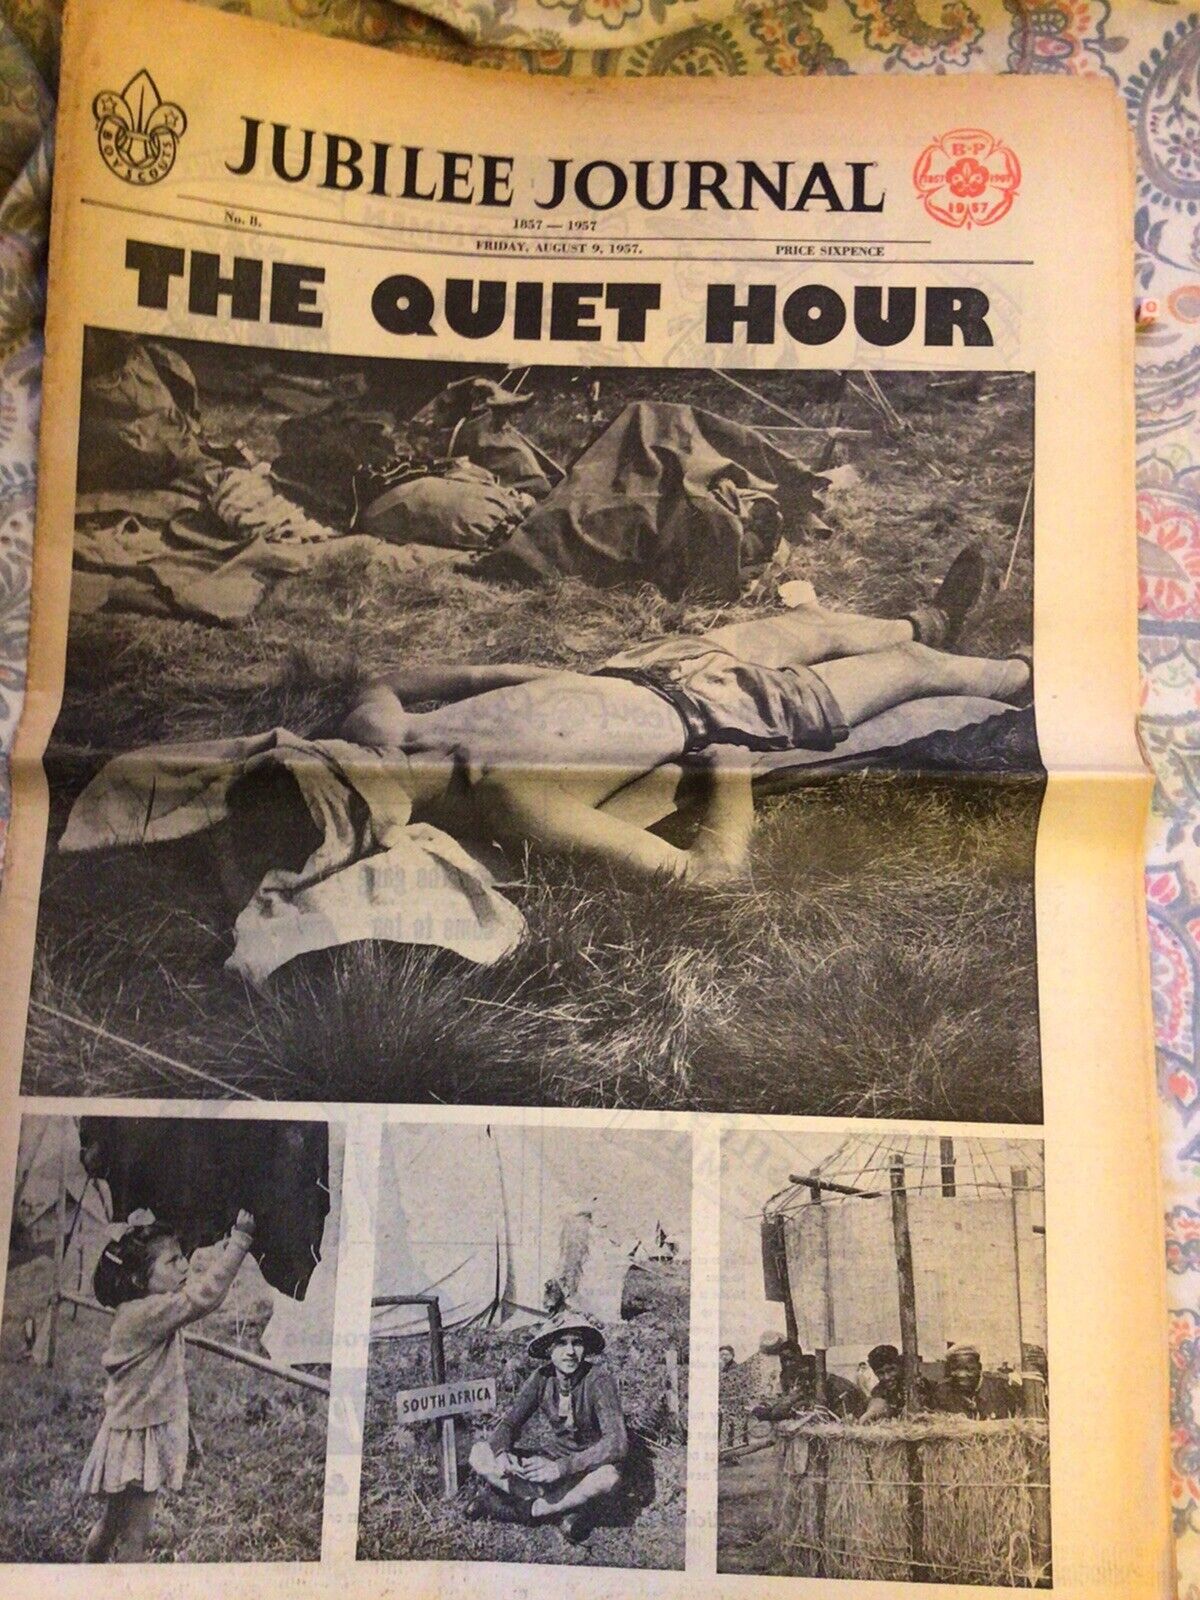 Very Rare Scouts Magazine Newspaper, 1957 AUG 9th , Jubilee Journal